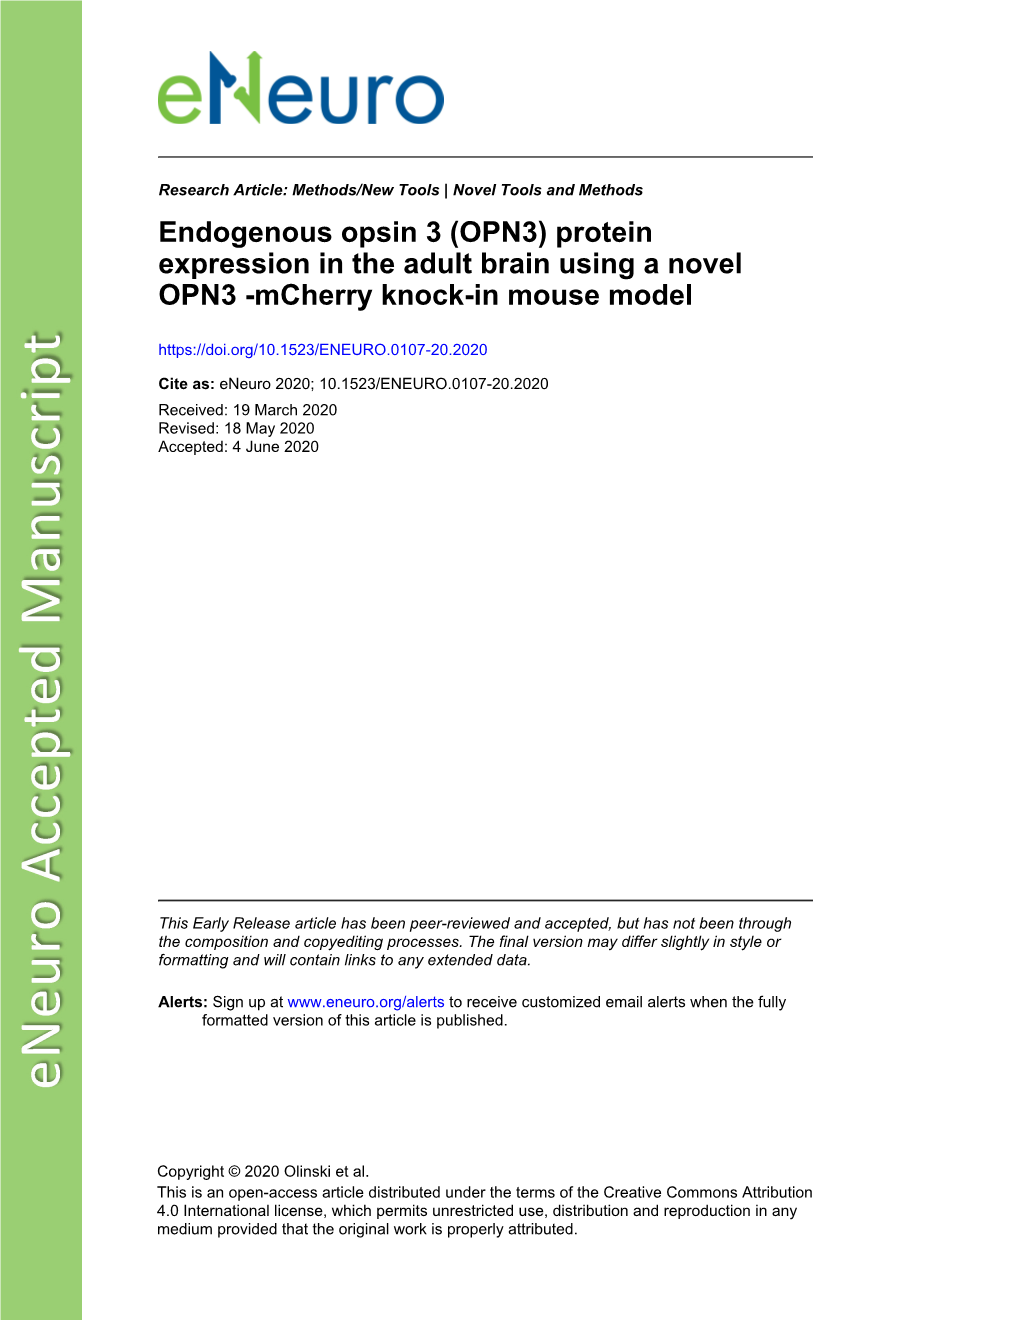 Protein Expression in the Adult Brain Using a Novel OPN3 -Mcherry Knock-In Mouse Model